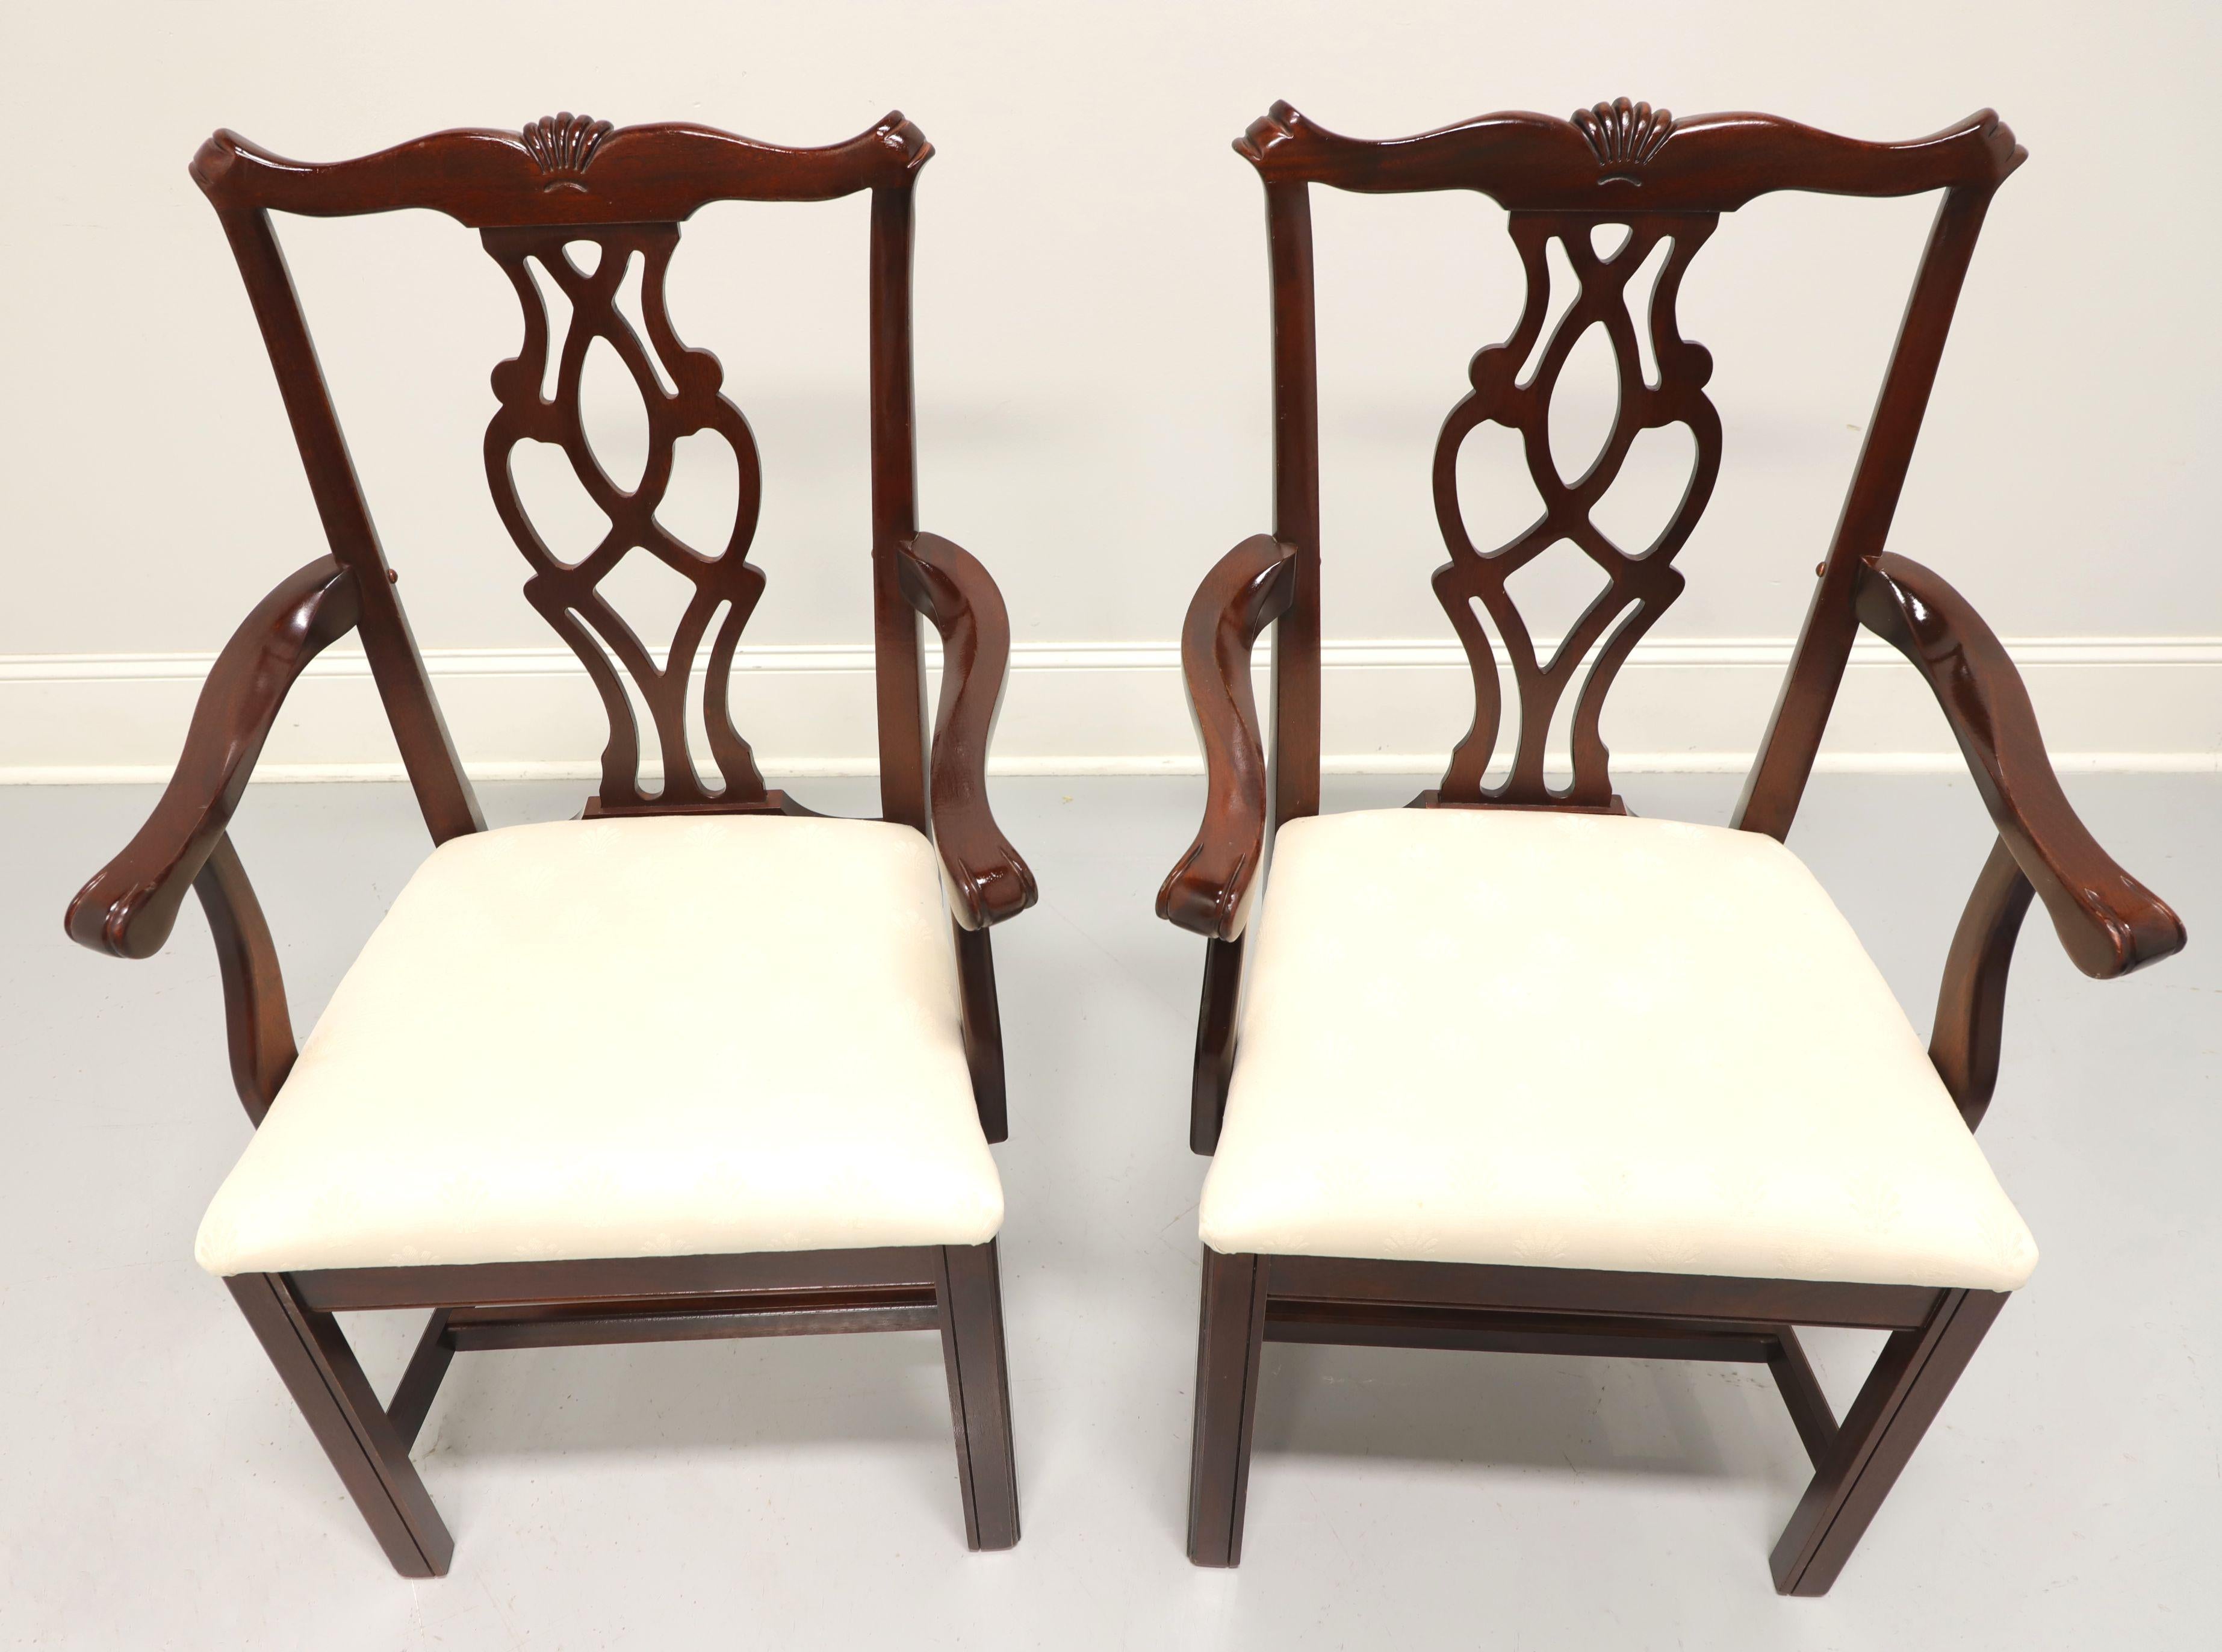 A pair of dining armchairs in the Chippendale style by Cresent, of Gallatin, Tennessee, USA. Mahogany, with fan carving to crestrail, carved backsplat, curved arms, neutral cream colored brocade fabric upholstered seat, straight legs and stretcher